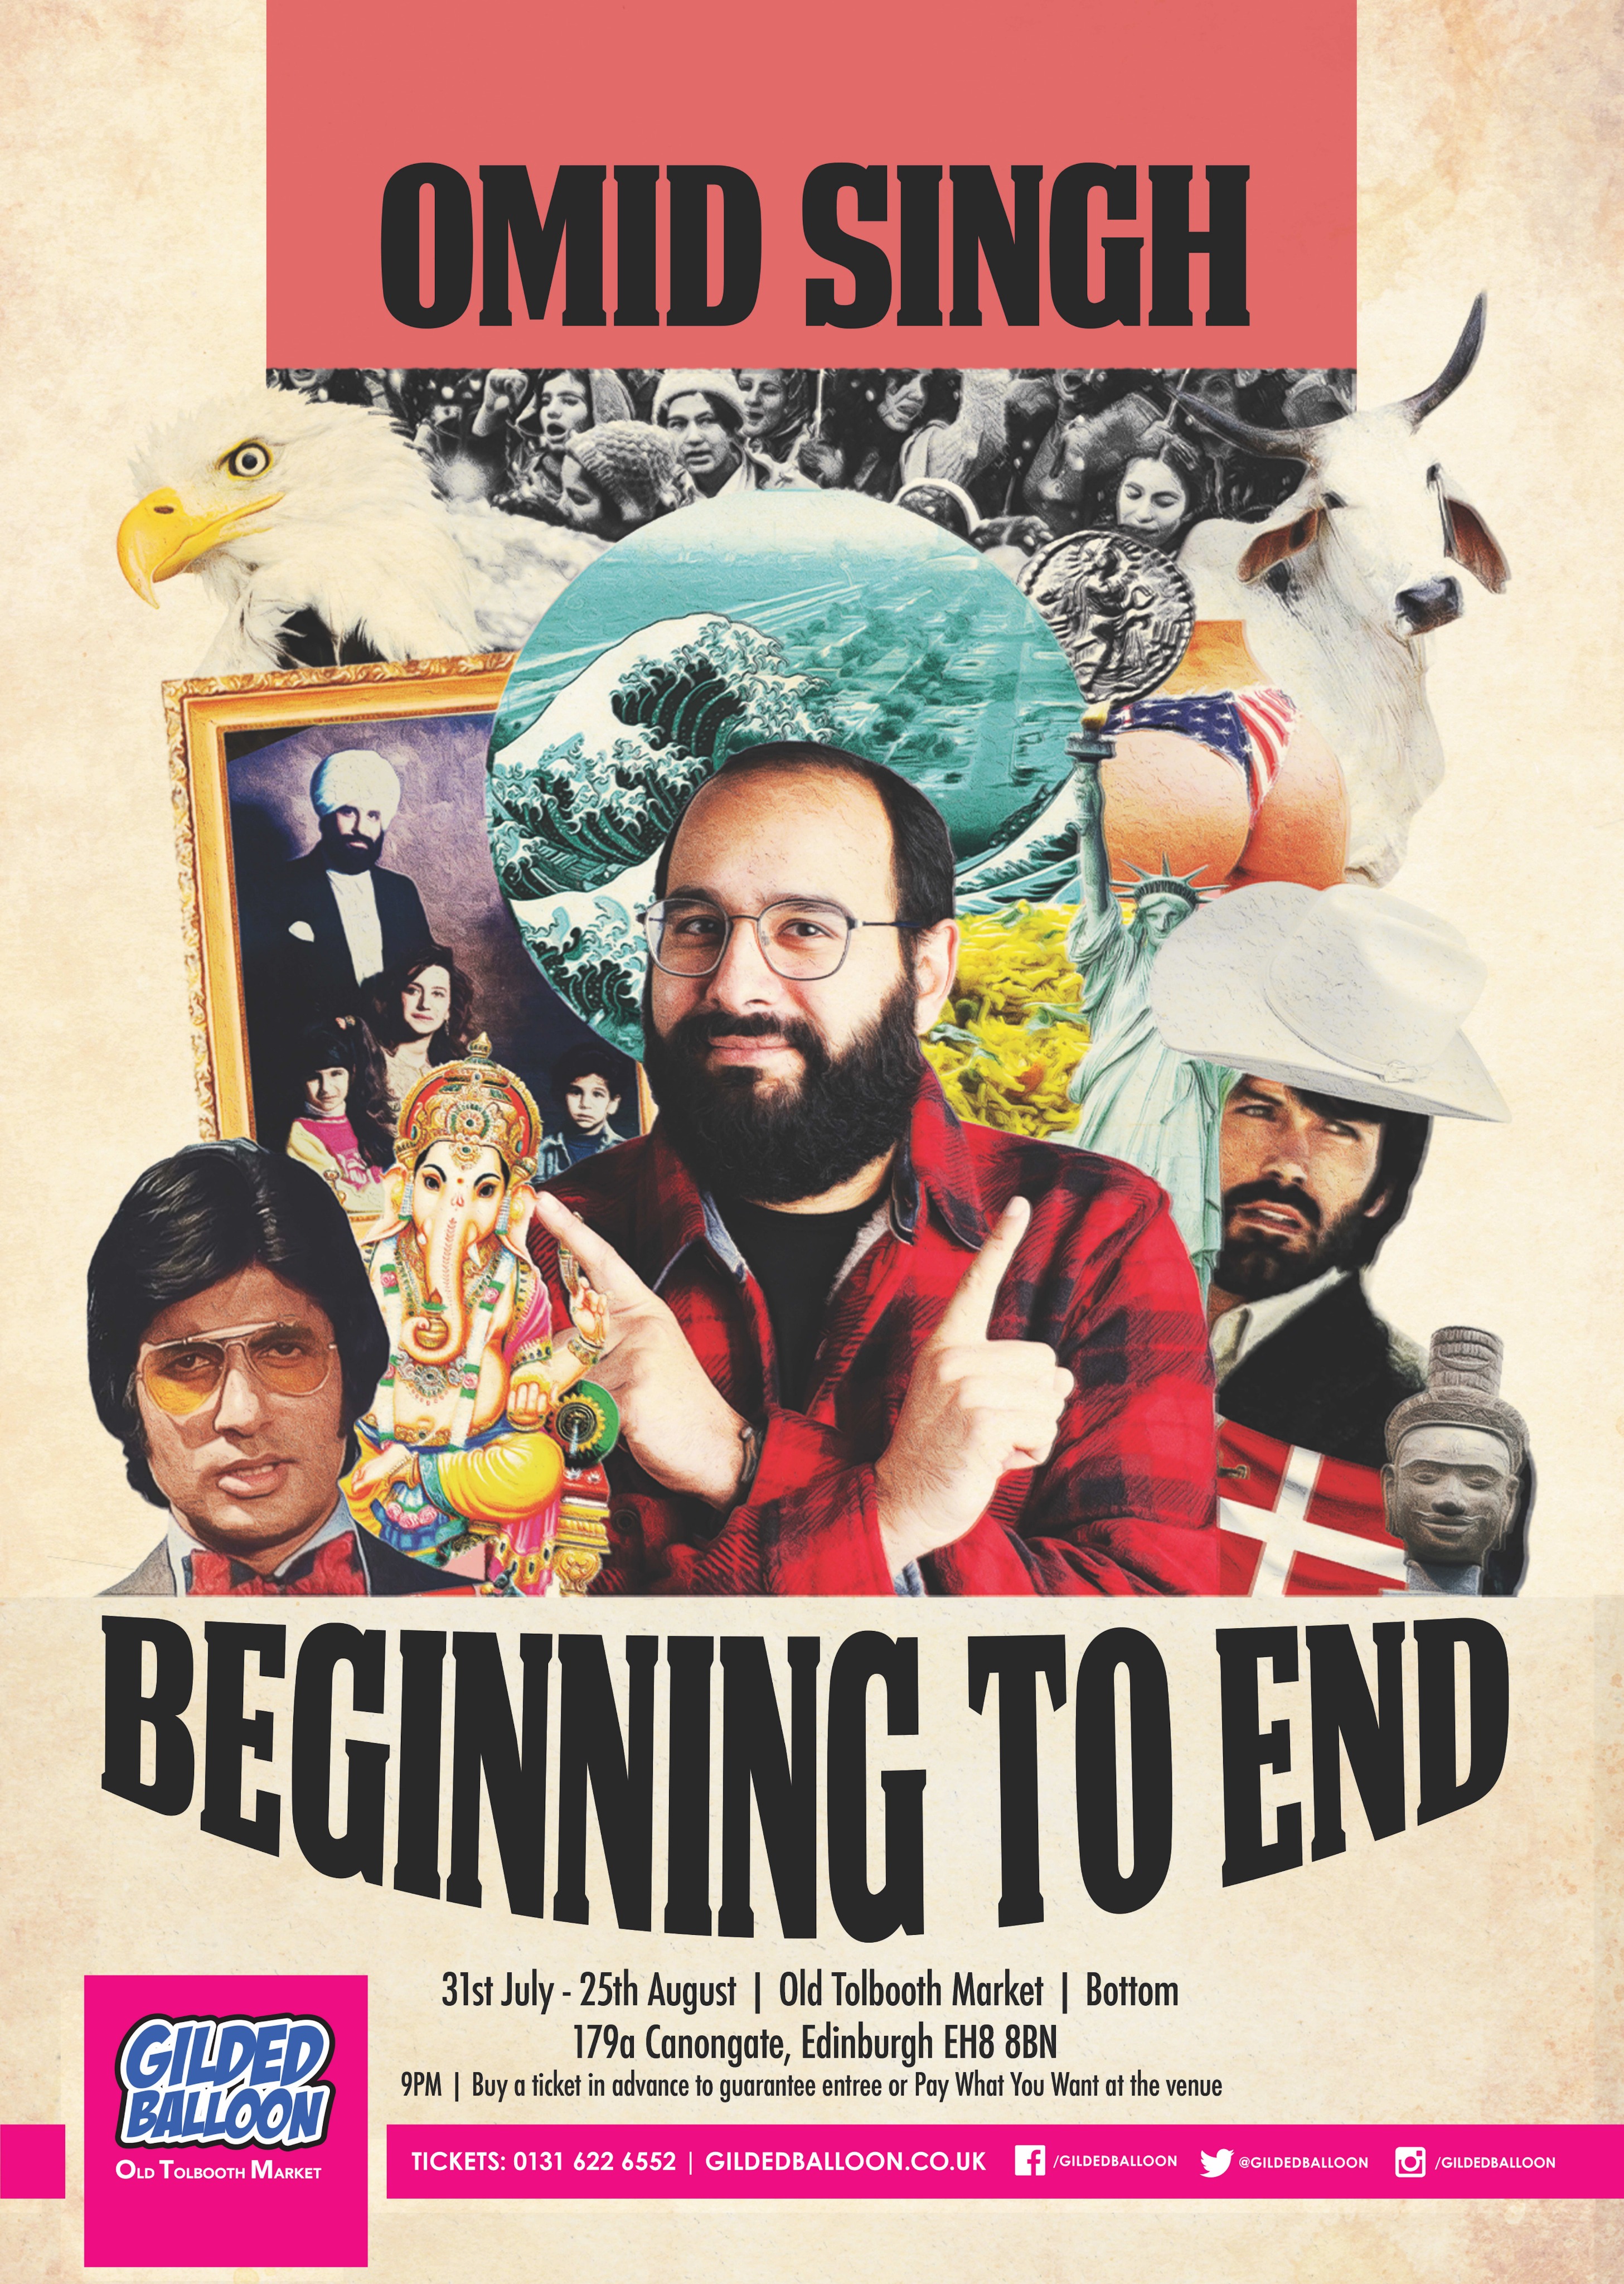 The poster for Omid Singh: Beginning To End